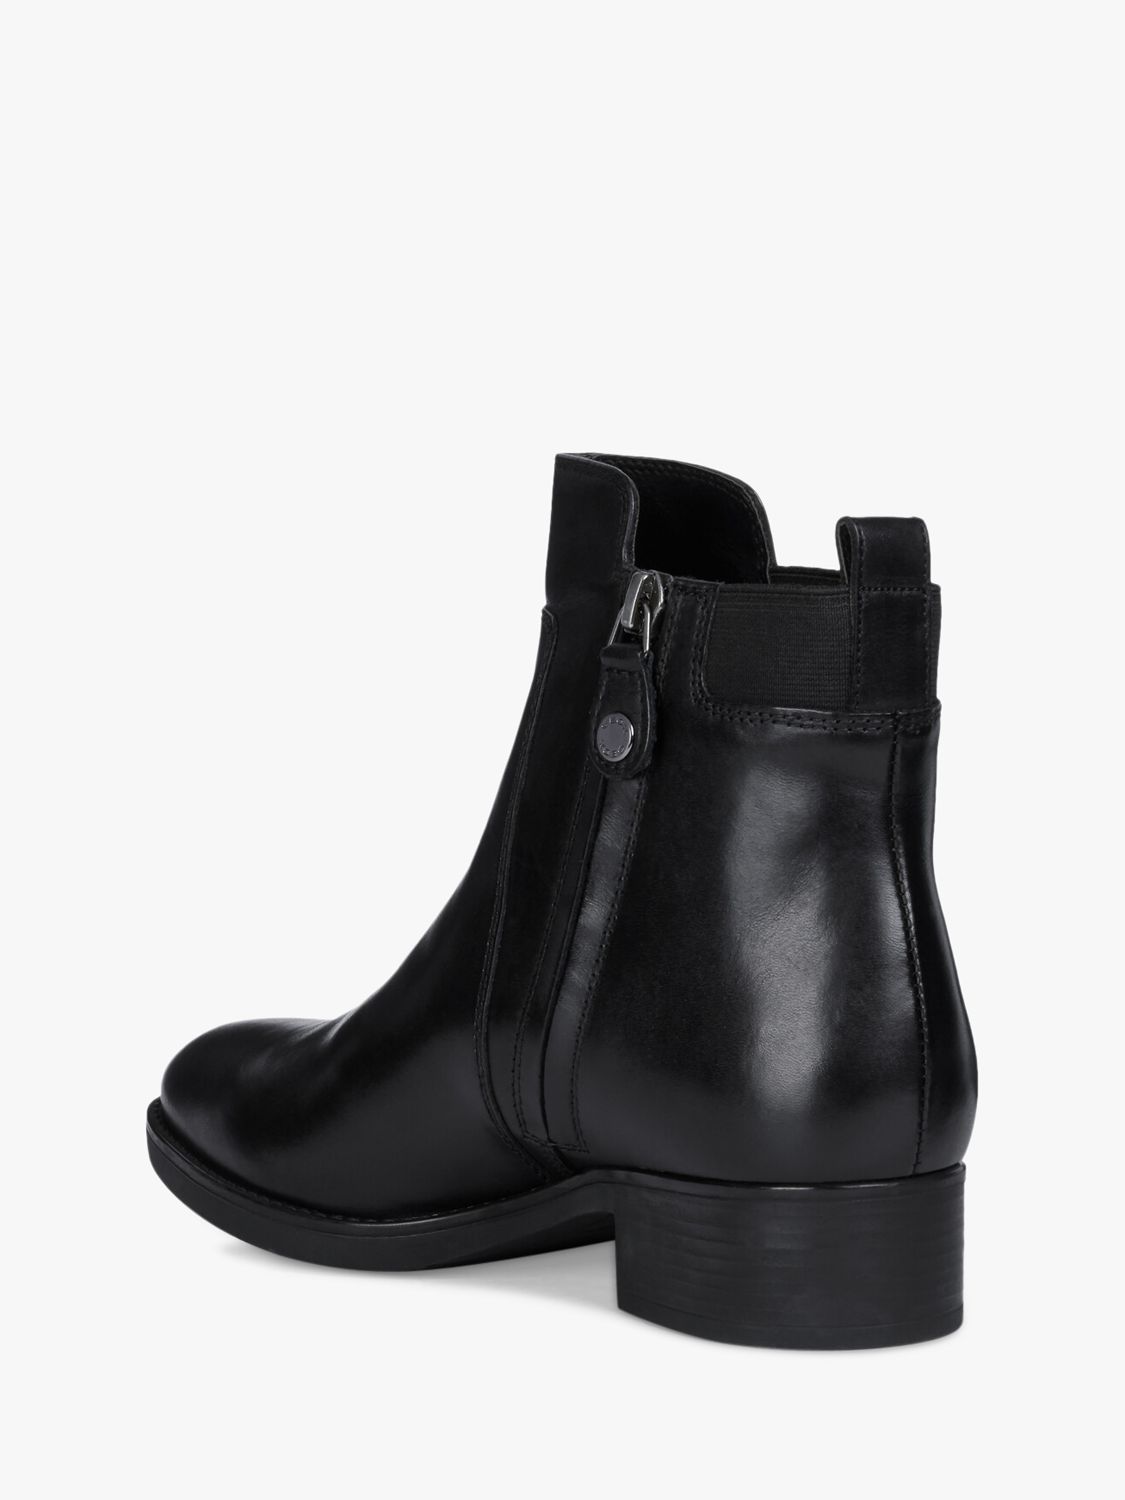 Women's Leather Heeled Ankle Boots, John Lewis & Partners